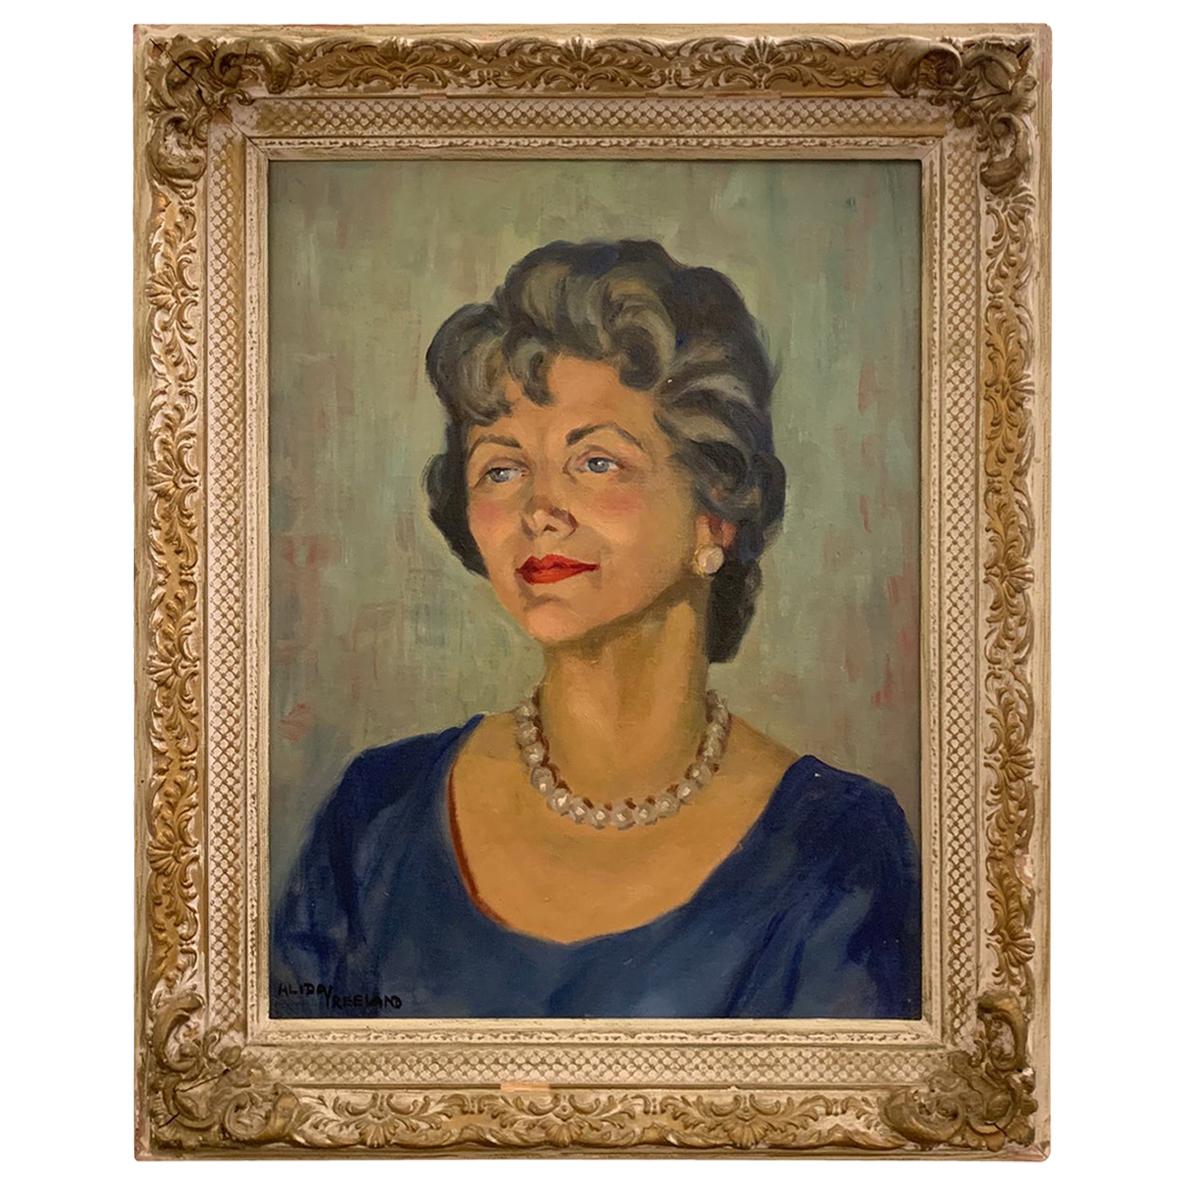 1950s Portrait Painting, Woman with Pearls, Alberta Winchester by Alida Vreeland